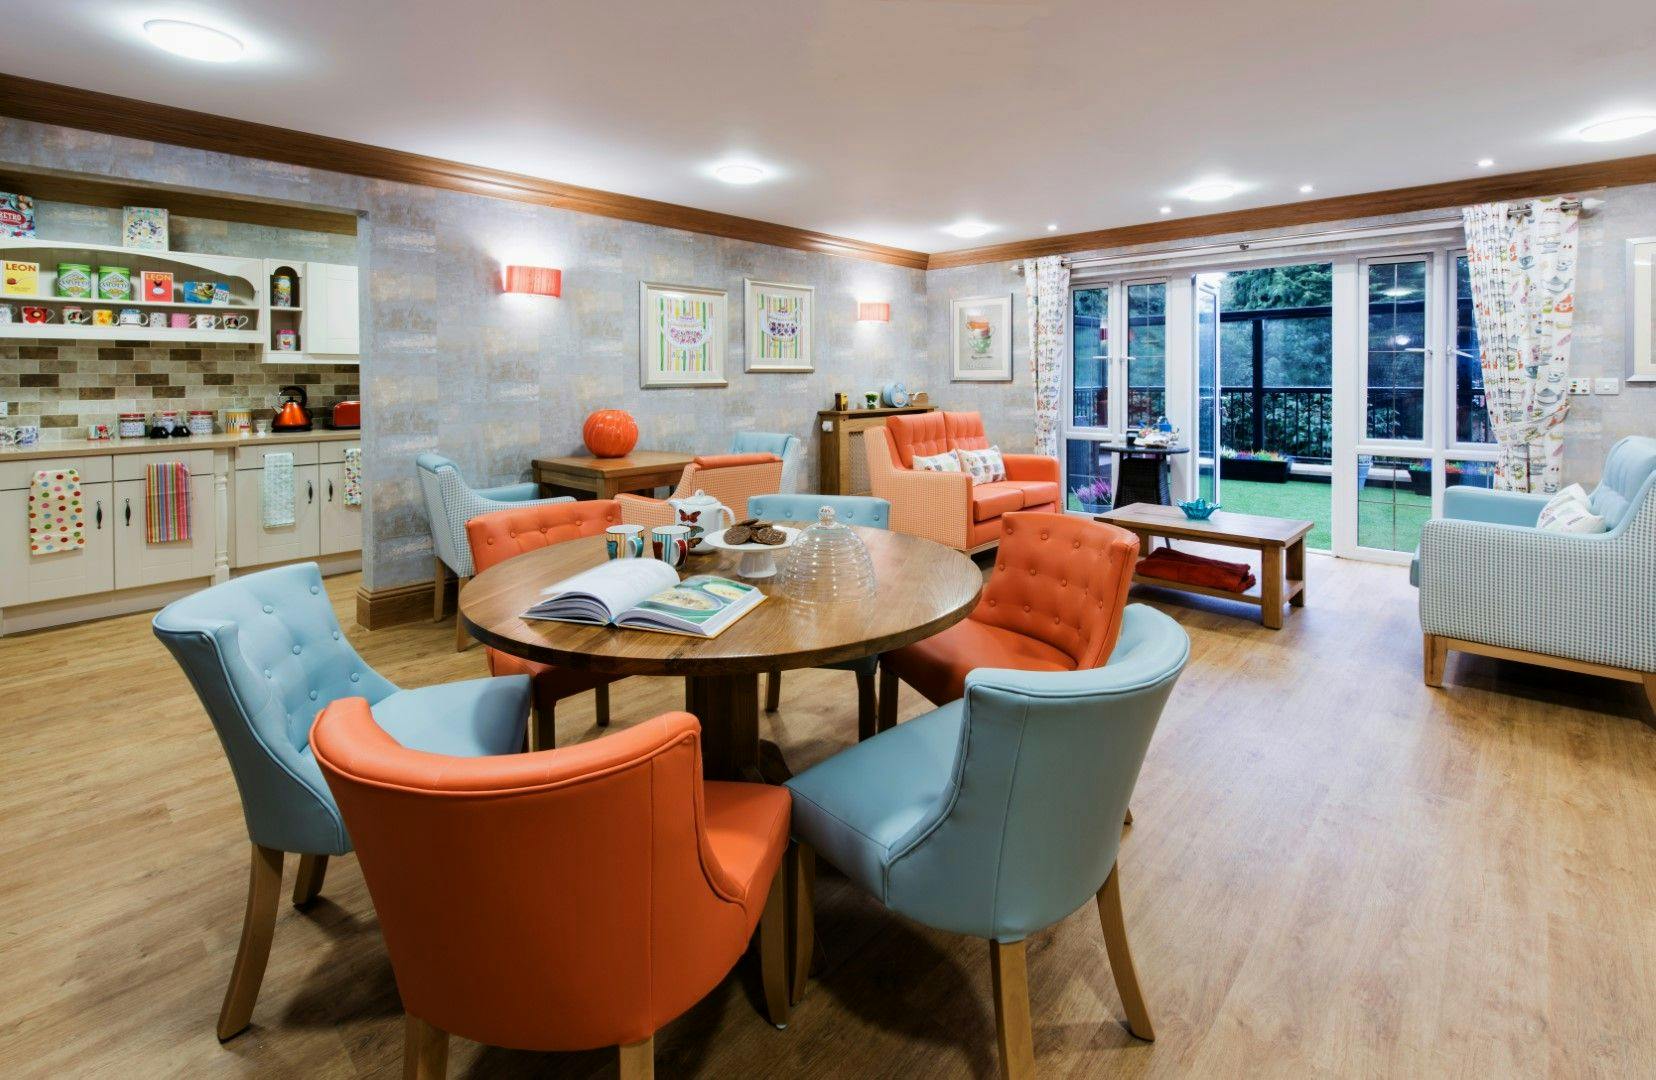 Dining Area at Anya court Care Home in Rugby, Warwickshire